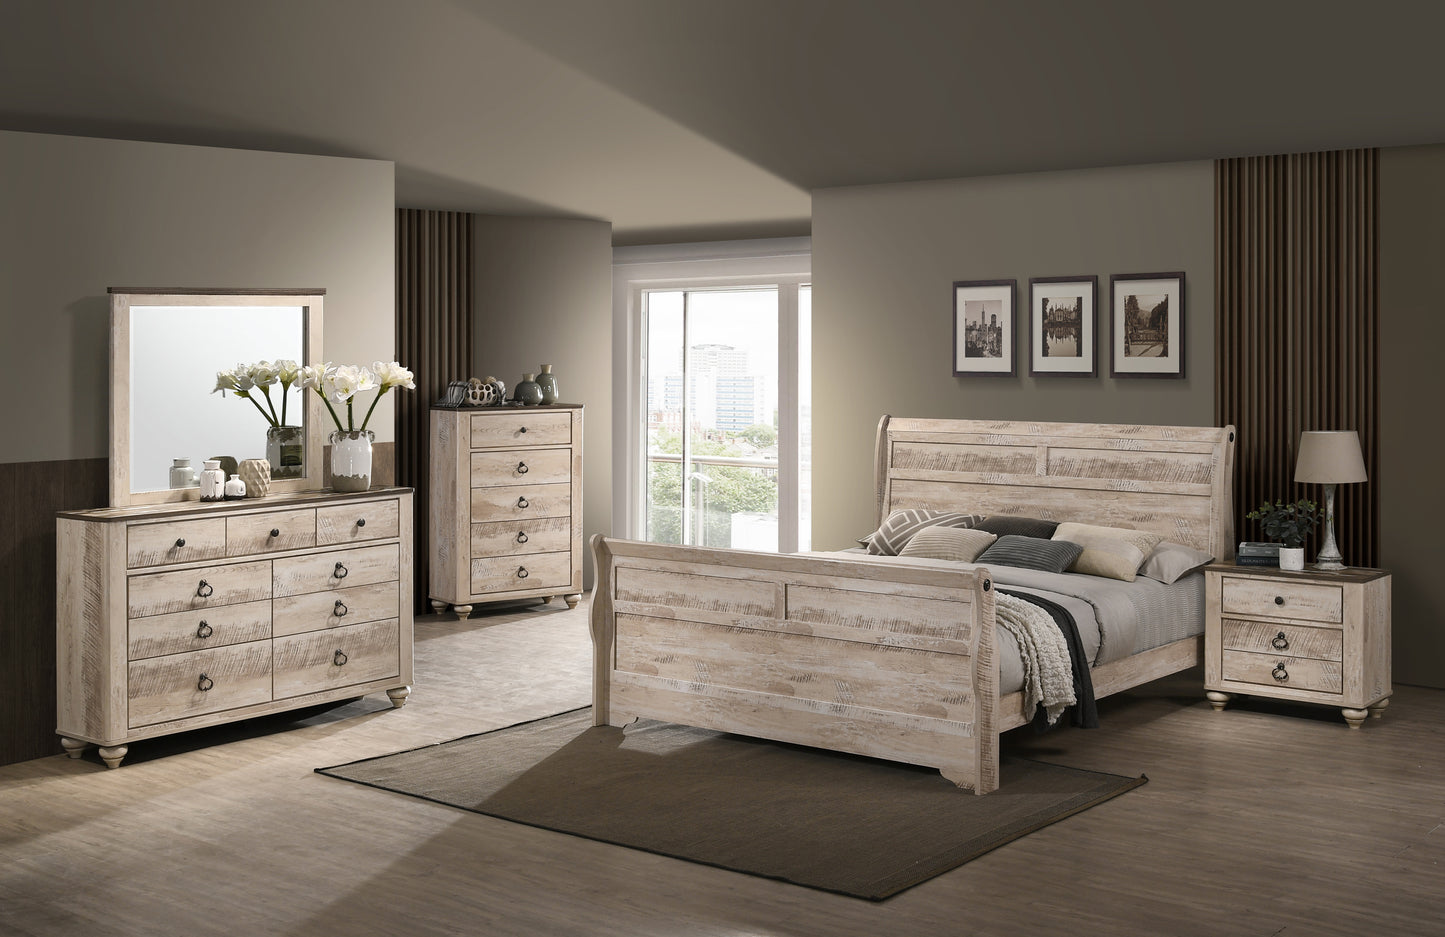 Imerland Contemporary White Wash Finish Bedroom Collection - Sleigh Bed